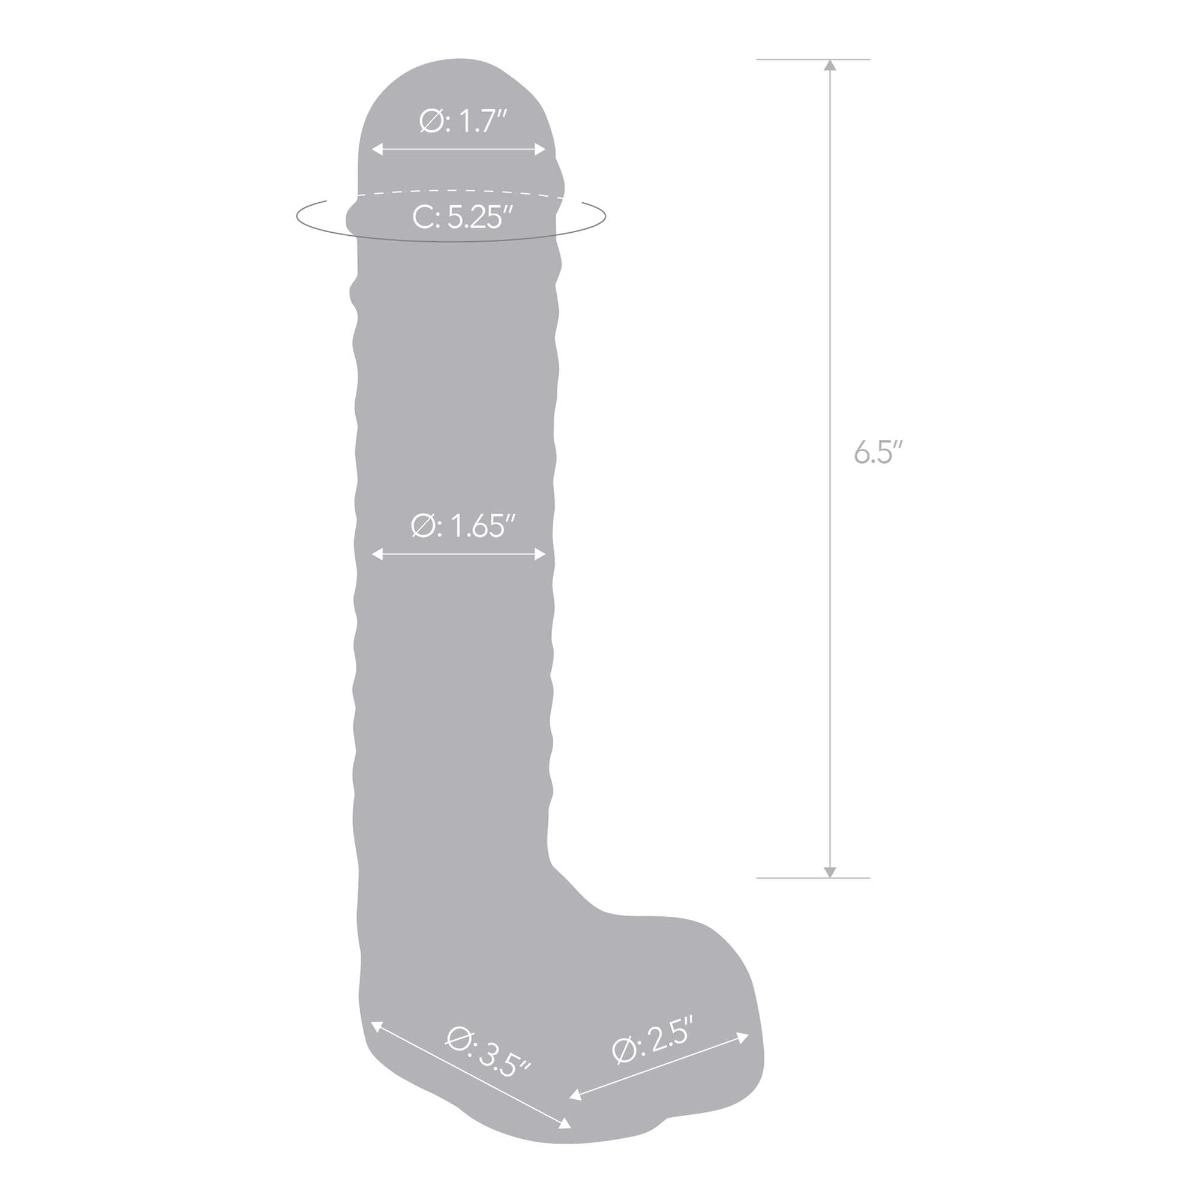 8” realistic ribbed glass g-spot dildo with balls